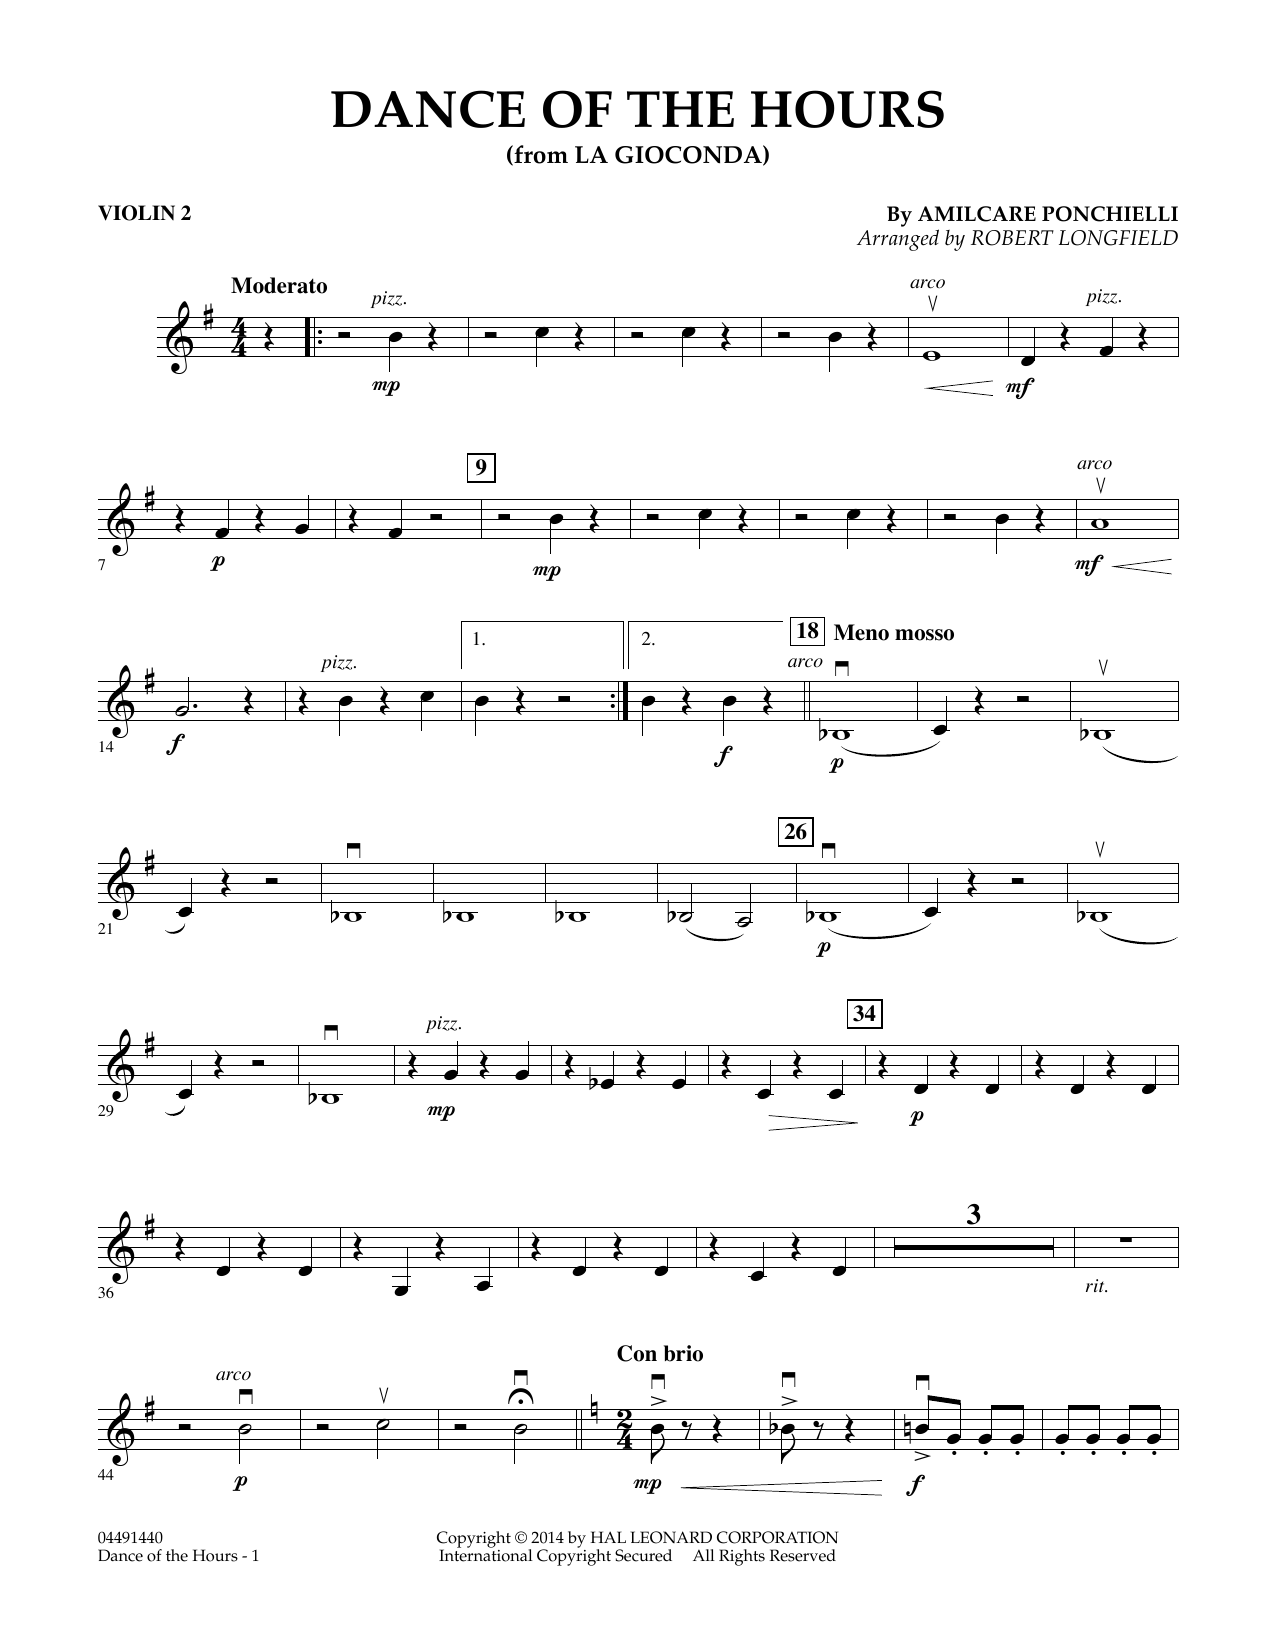 Download Amilcare Ponchielli Dance of the Hours (arr. Robert Longfield) - Violin 2 sheet music and printable PDF score & Classical music notes